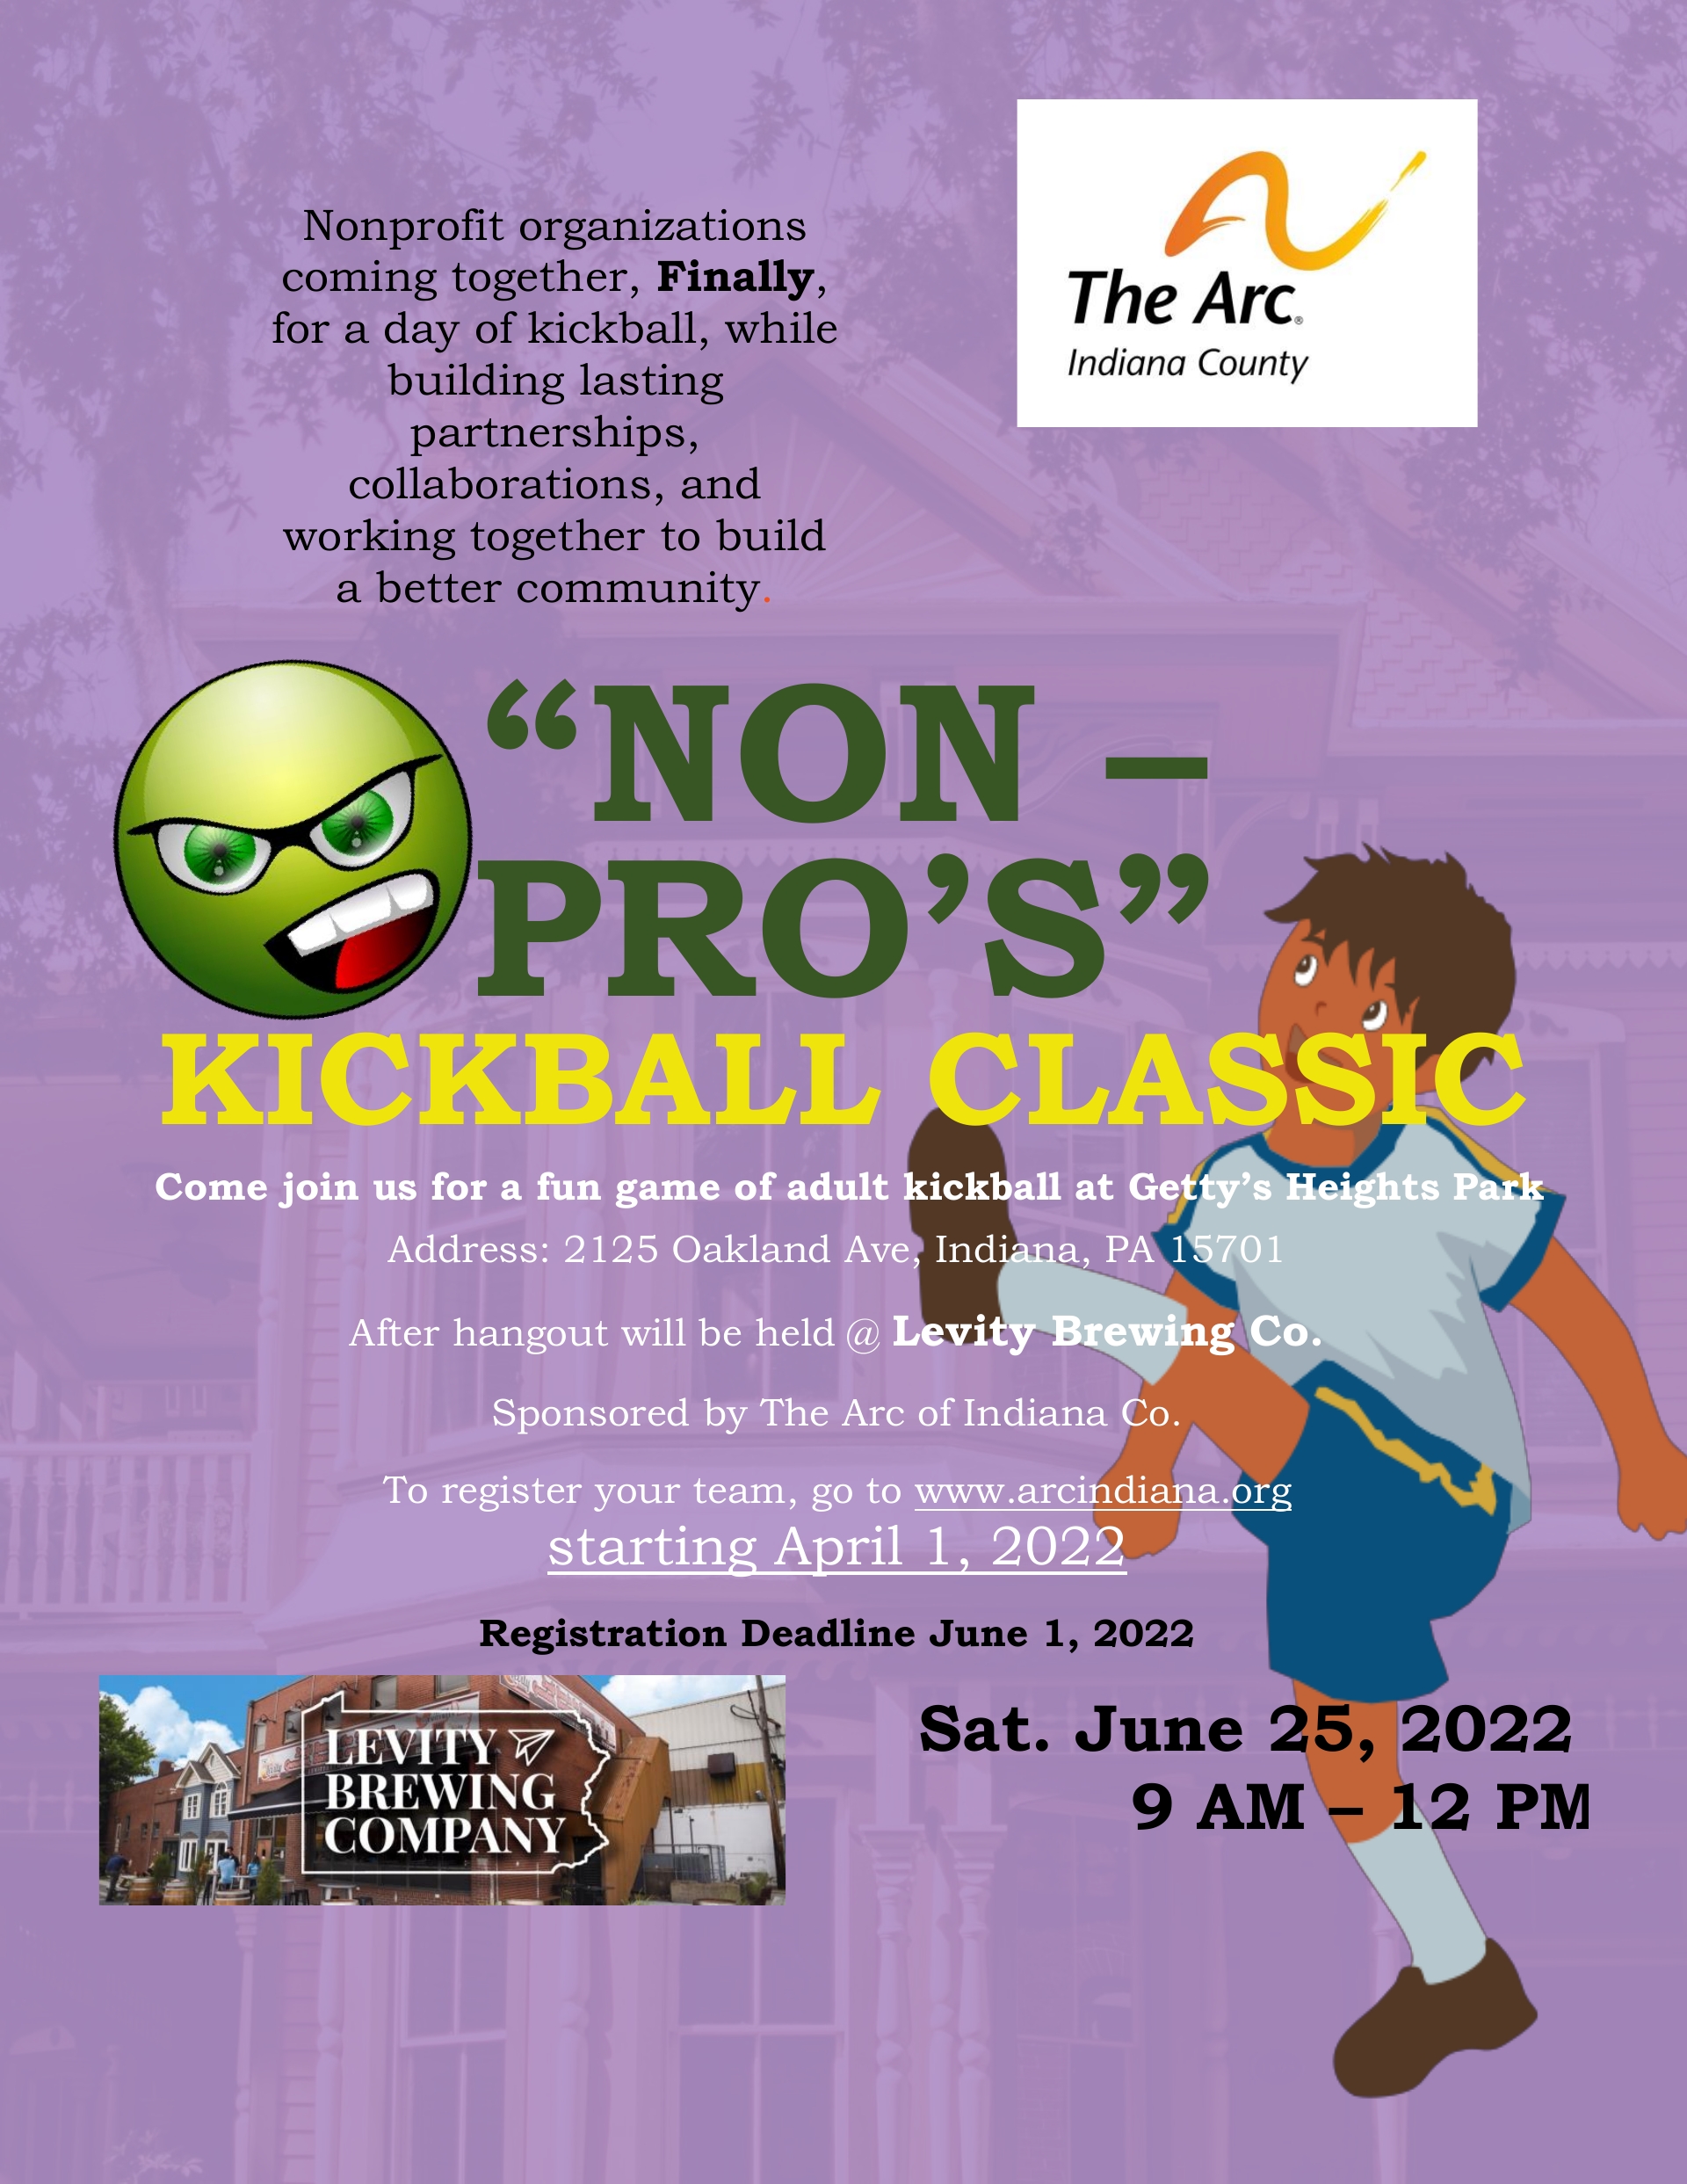 KICKBALL, NON-KICK, and Fundraiser Forms too!! Sign up!! Indiana County!